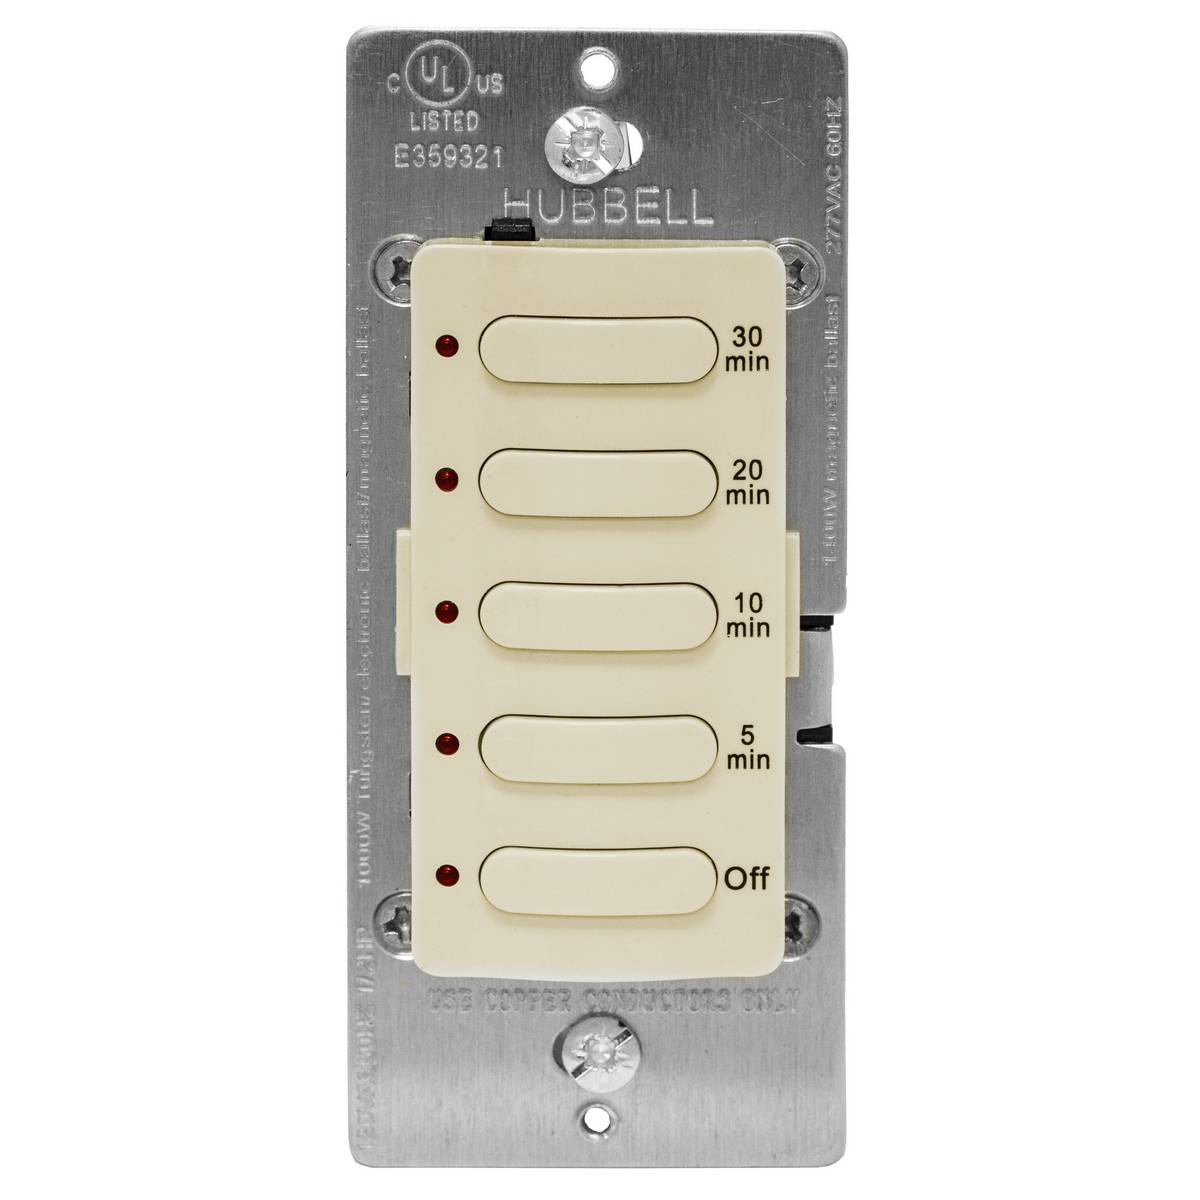 Wiring Device-Kellems DT5030I Countdown Fixed Standard Timer Wall Switch With Red LED Indicator, OFF, 5, 10,20, 30 min Setting, 120/277 VAC, 2 Poles